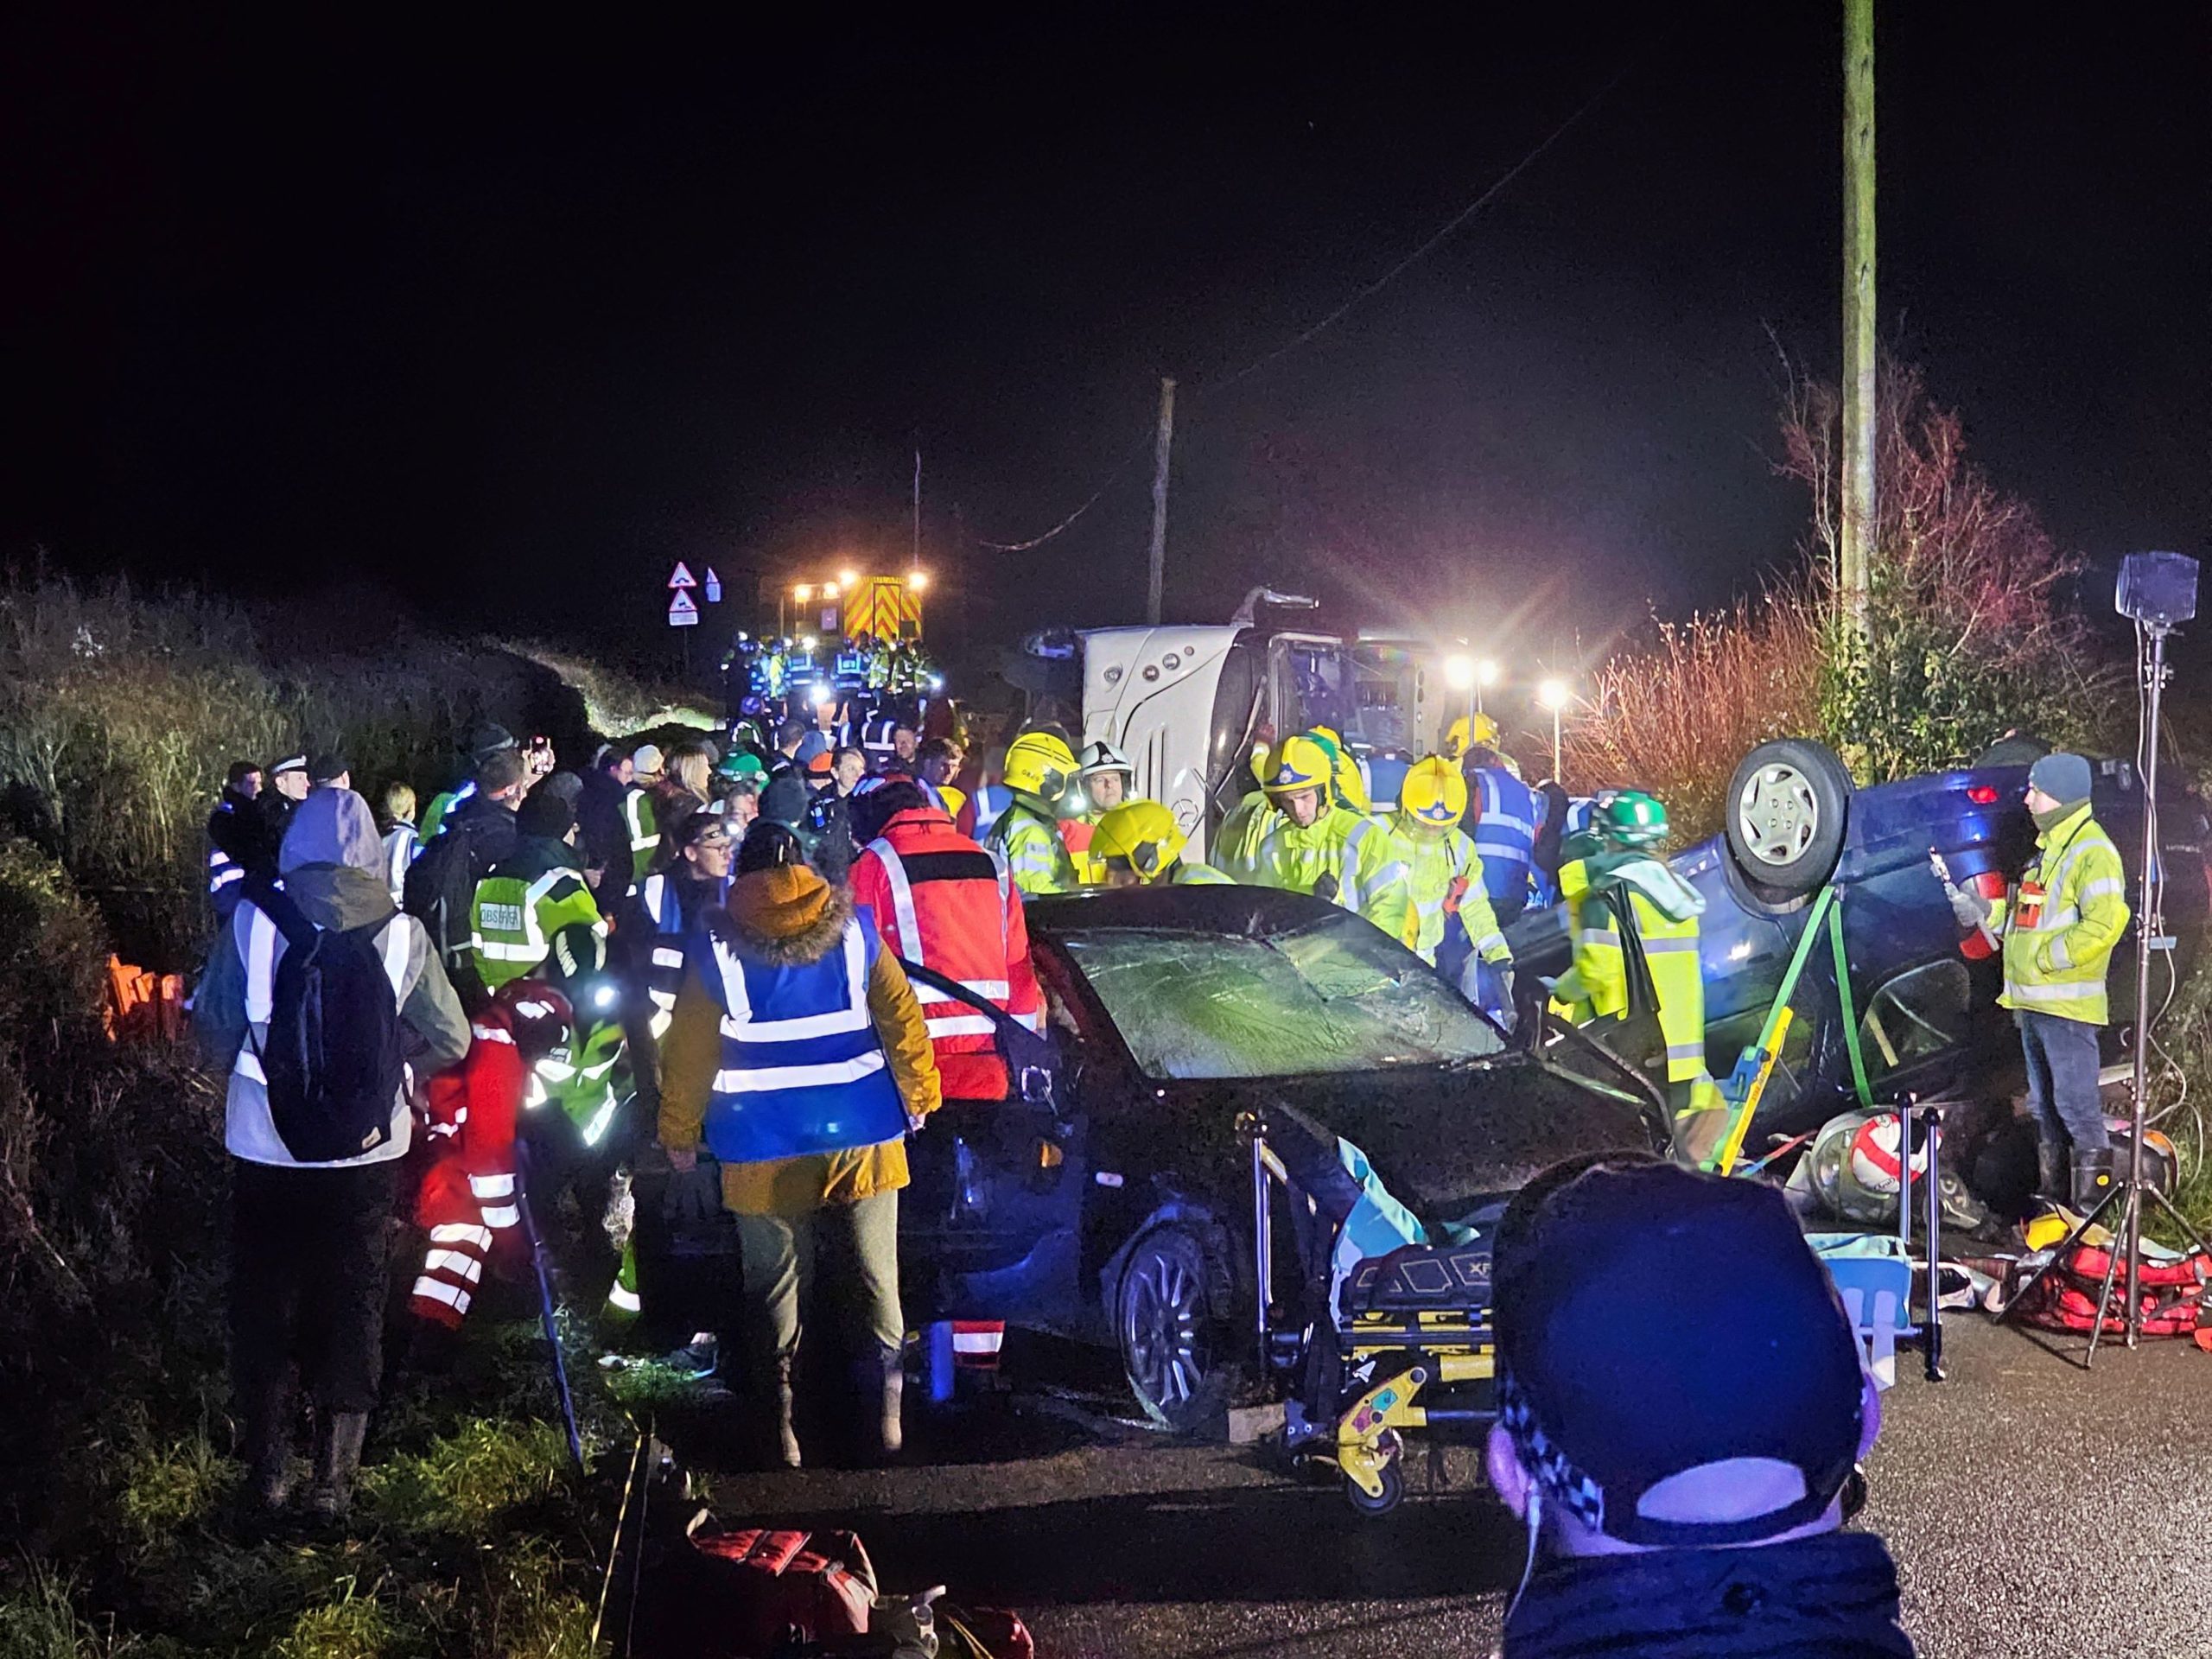 Emergency service personnel at a training simulation at night